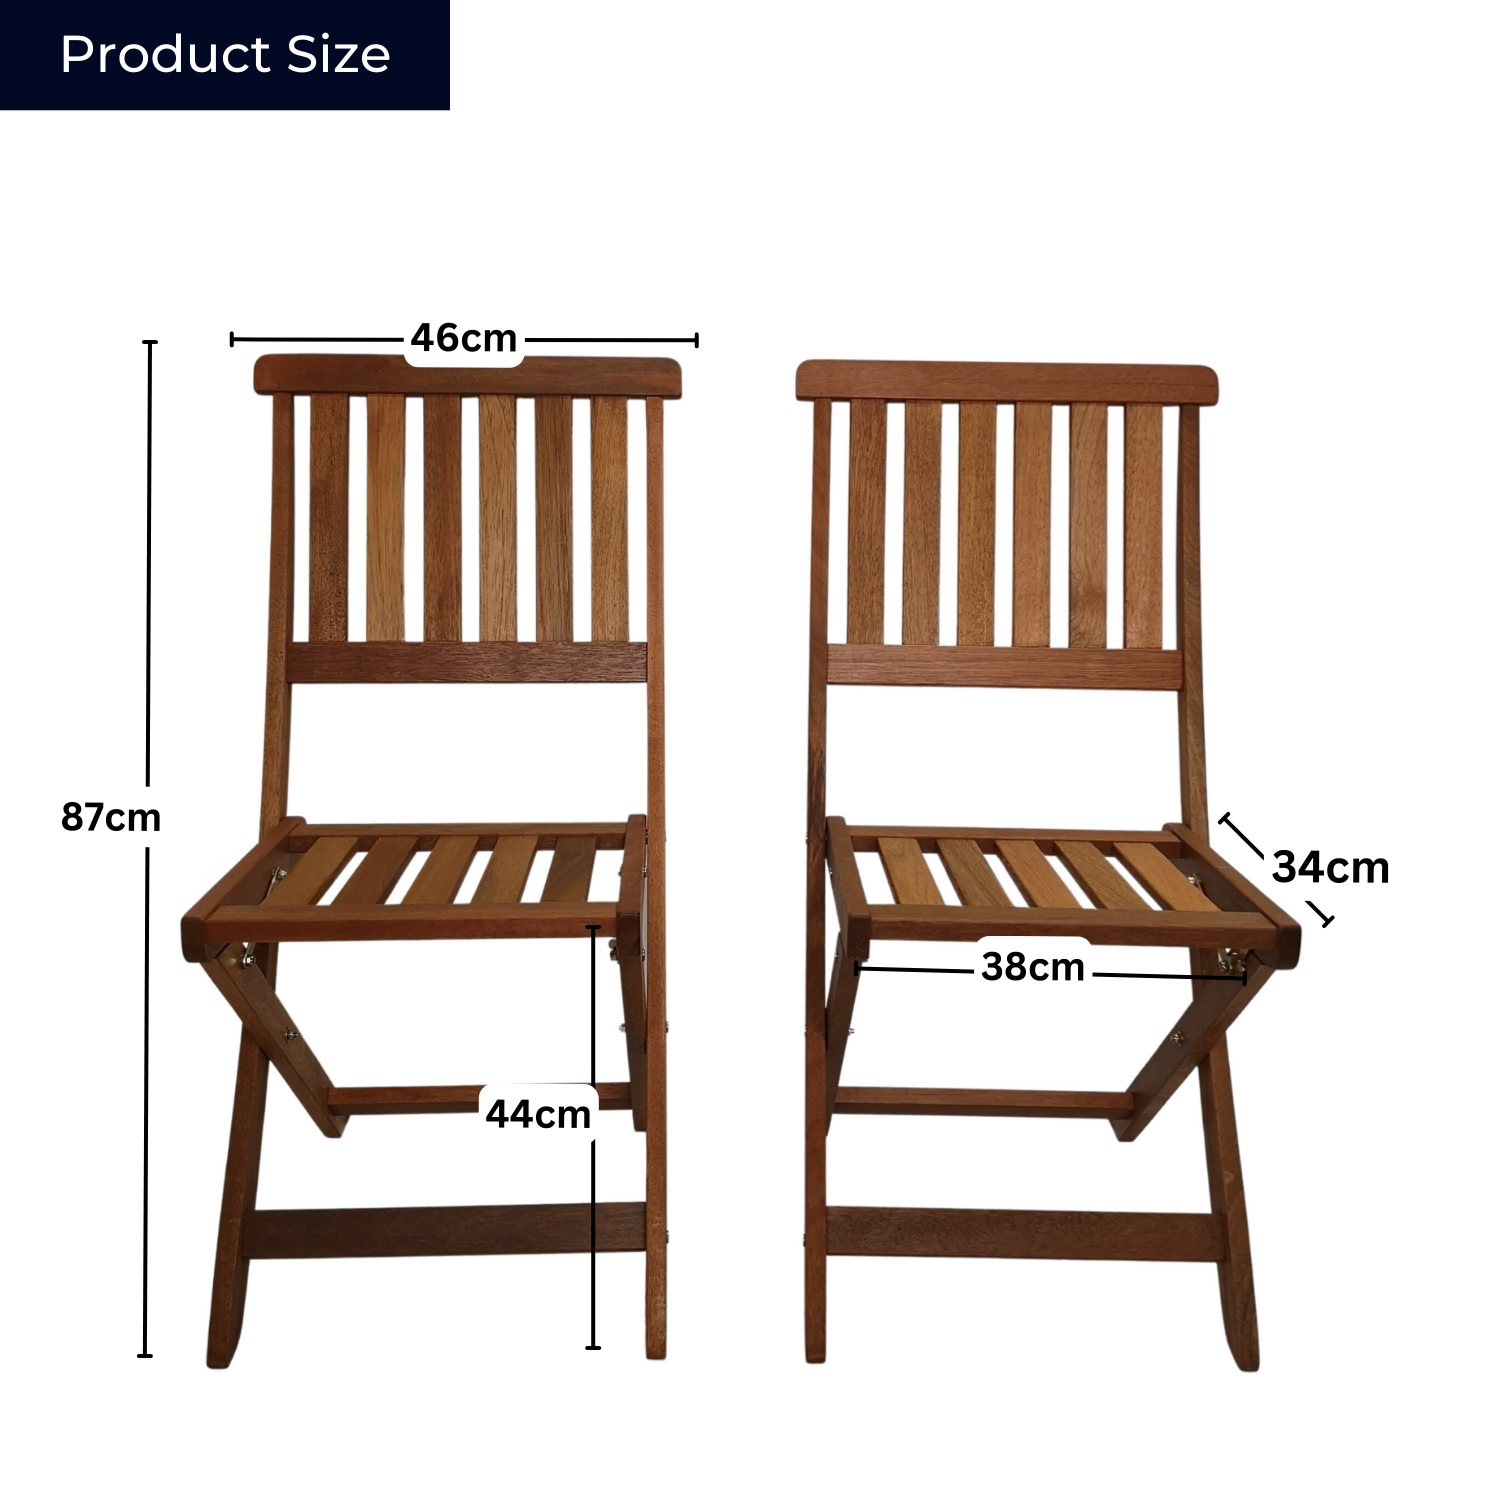 Outdoor 6 Person Folding Rectangular Wooden Garden Patio Dining Table Chairs Set